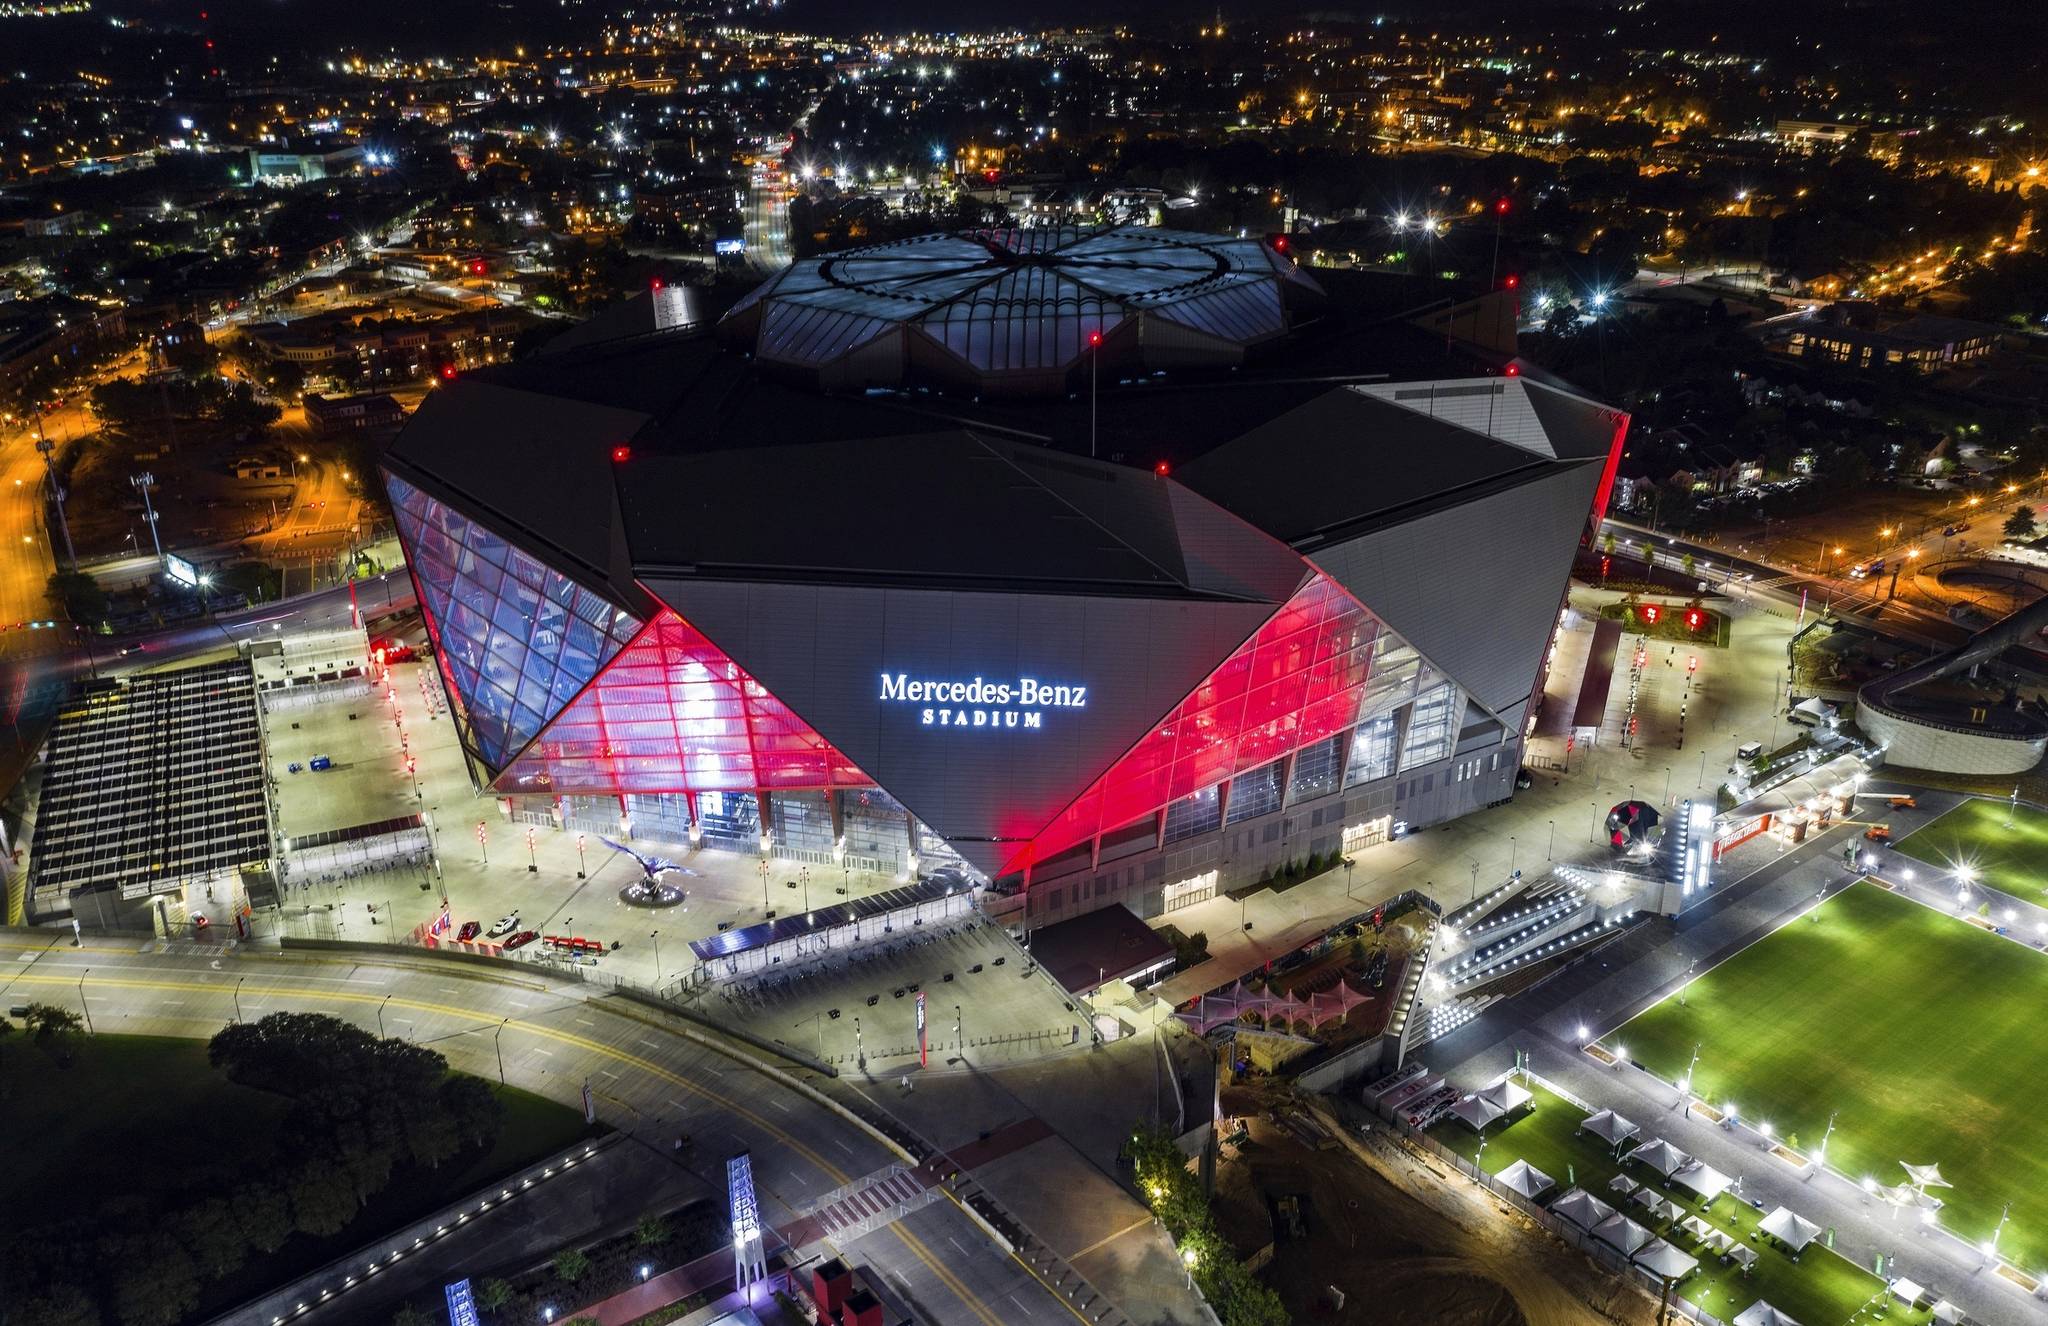 In this Friday, Sep. 21, 2018, photo, Mercedes-Benz Stadium is seen in this aerial photo in Atlanta. The stadium will be the site of Super Bowl LIII on Sunday, Feb. 3, 2019. Atlanta leaders, police and federal officials plan to discuss public safety plans ahead of Super Bowl 53. (AP Photo/Danny Karnik)